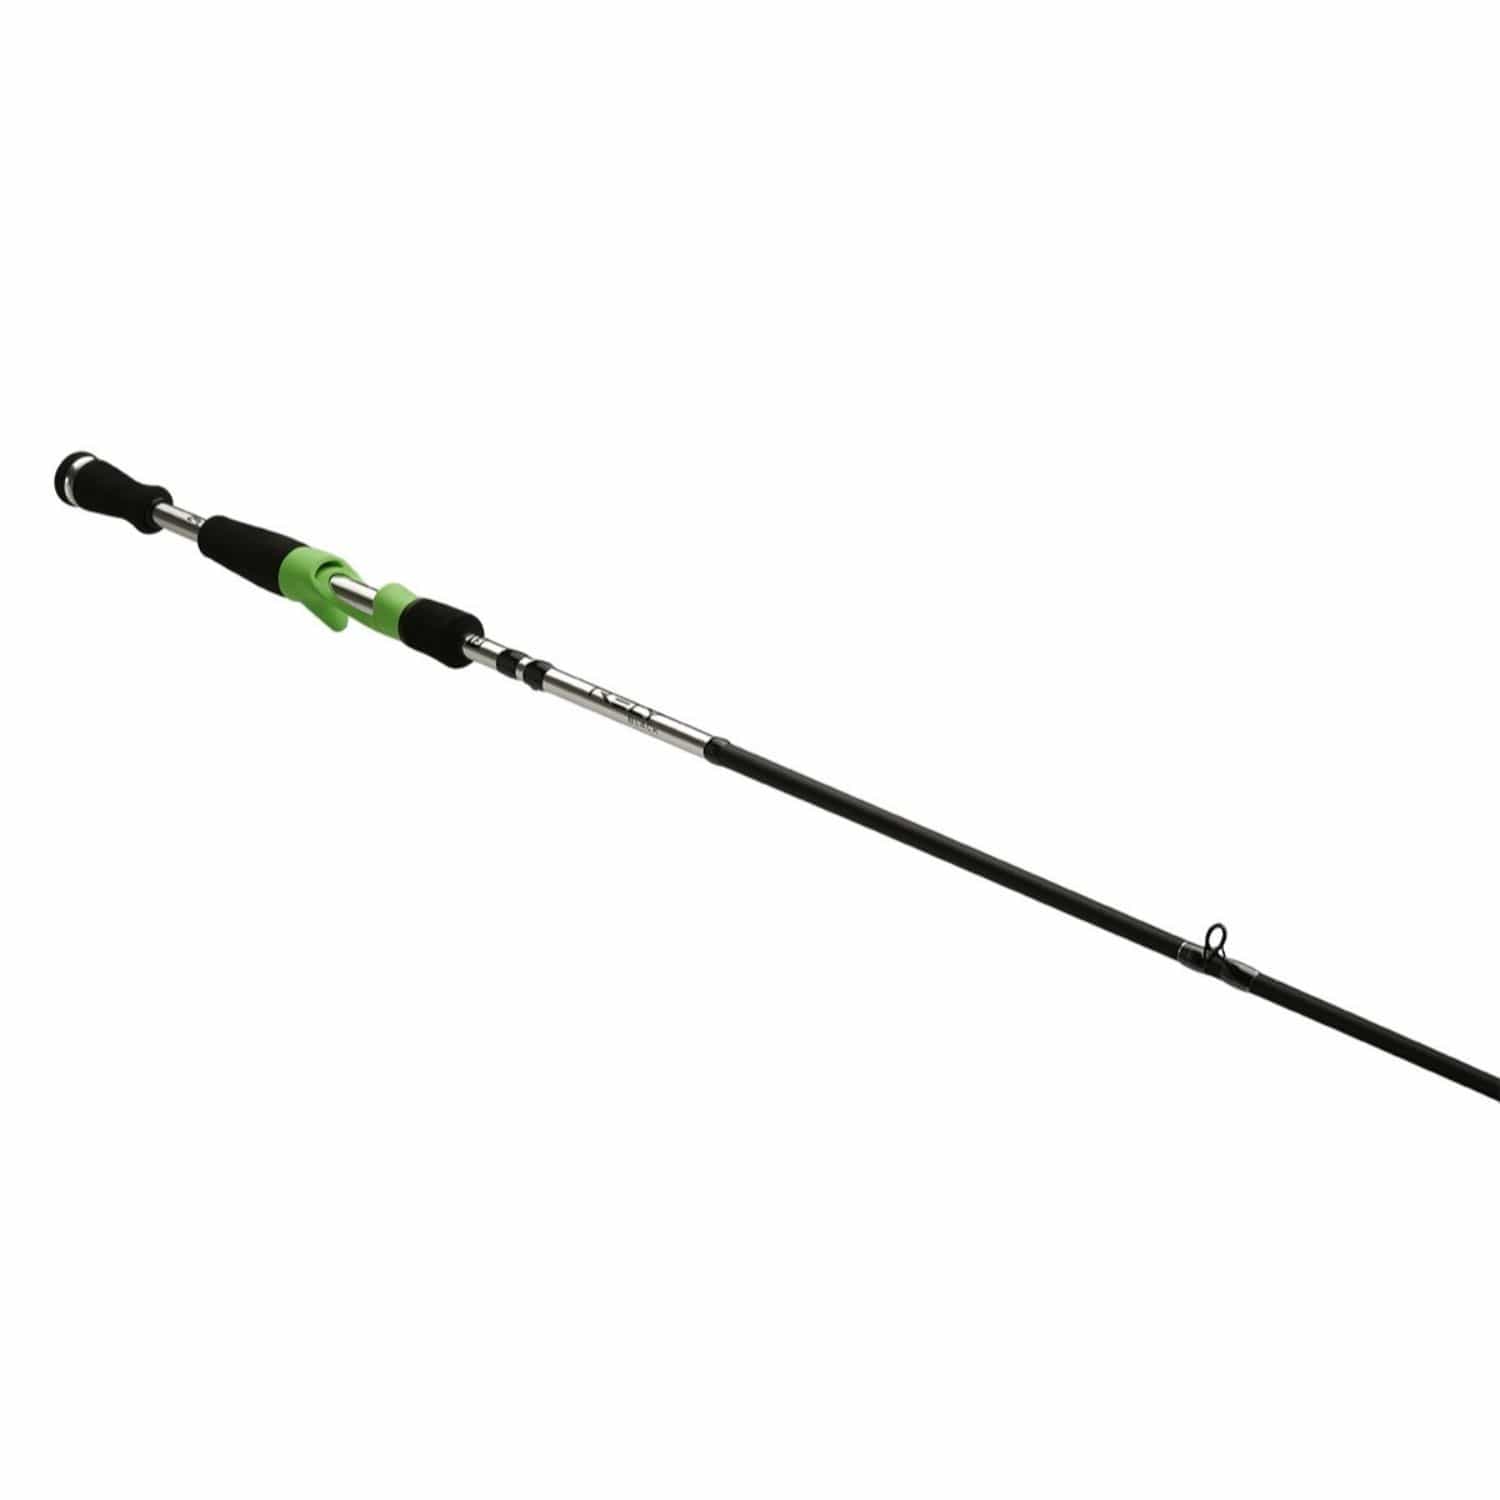 13 Fishing Fishing : Rods 13 Fishing Rely 7 ft 1 in MH Casting Rod